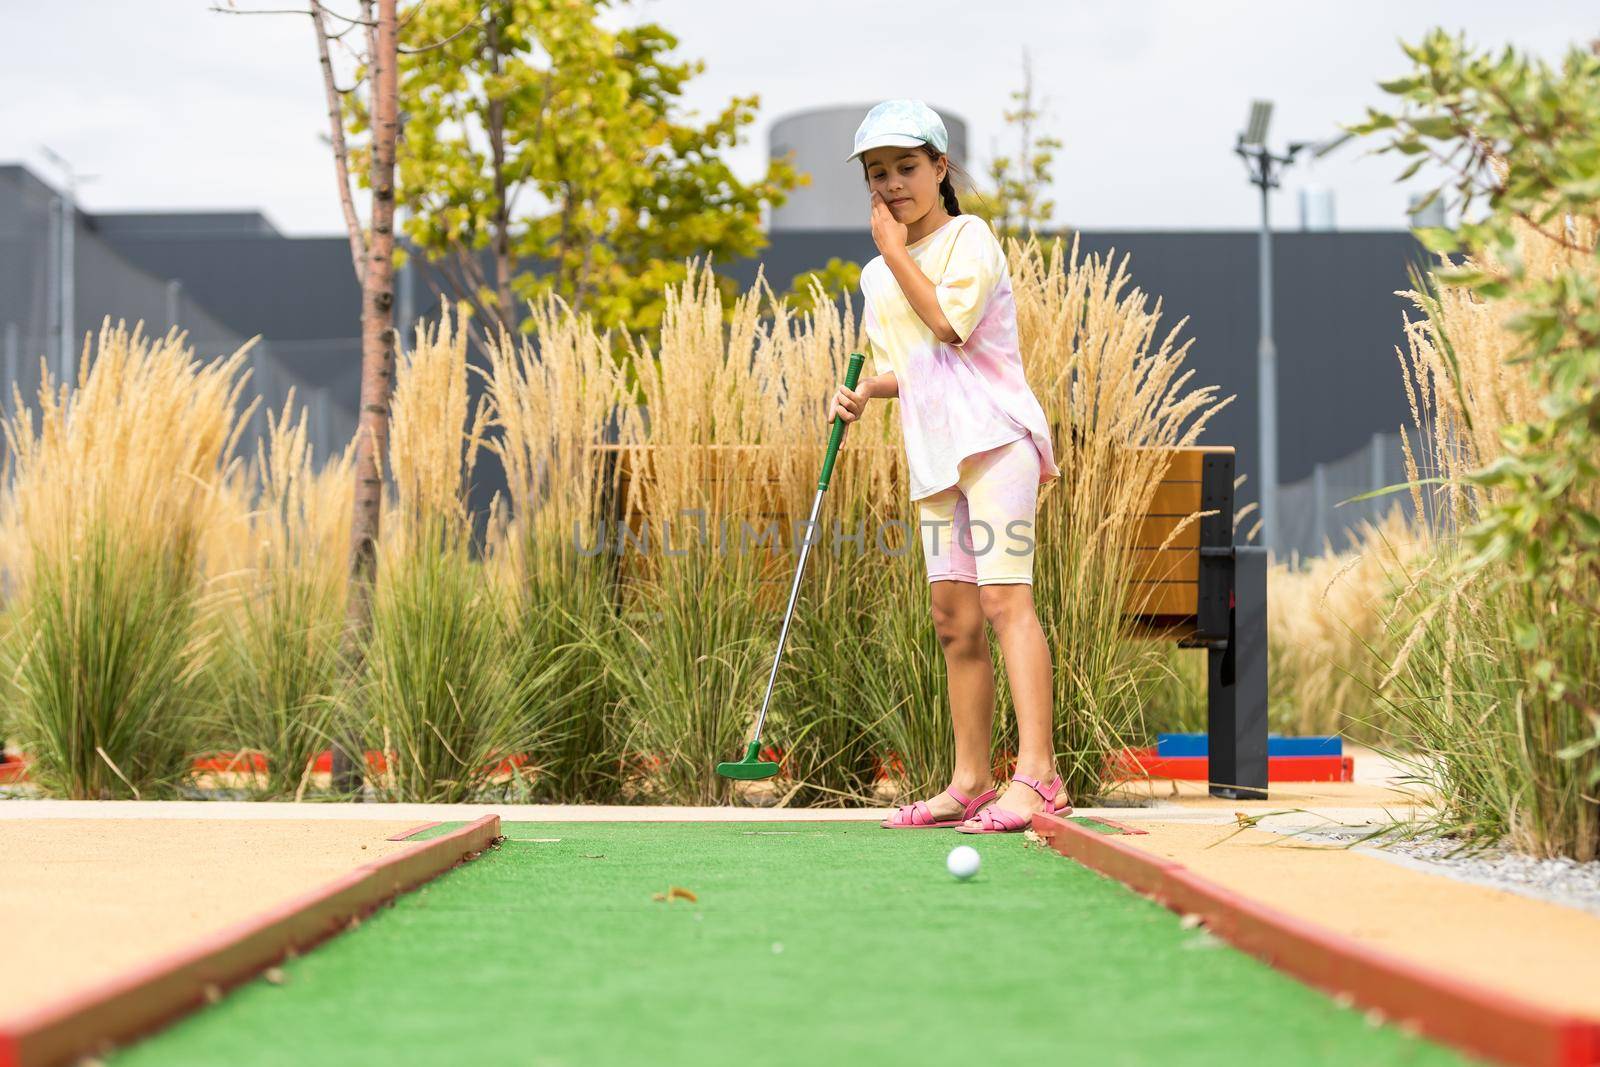 Cute preschool girl playing mini golf with family. Happy child having fun with outdoor activity. Summer sport for children and adults, outdoors. Family vacations or resort